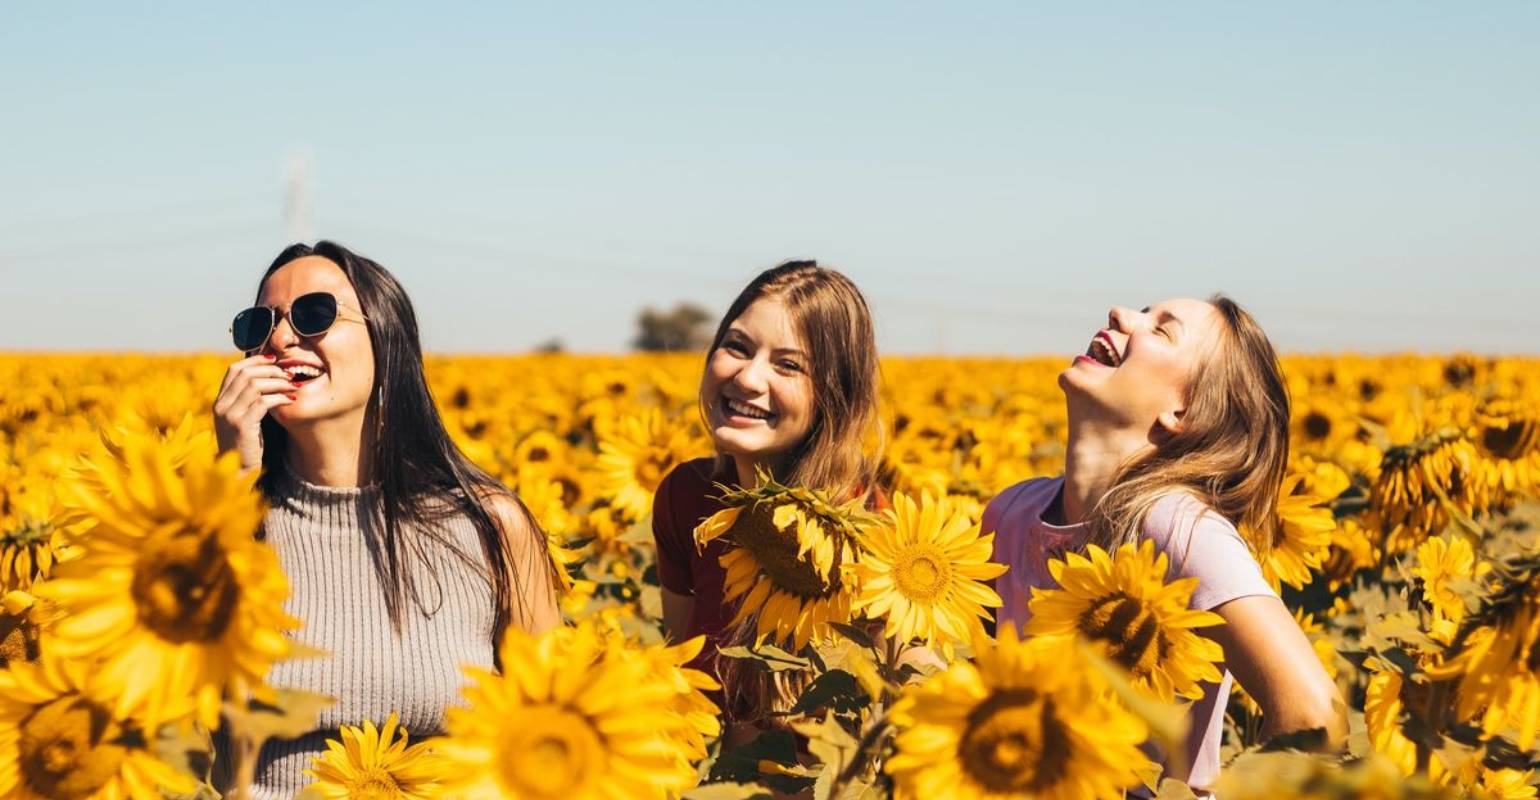 An upscaled and enhanced photo of three women sanding on a sunflower field